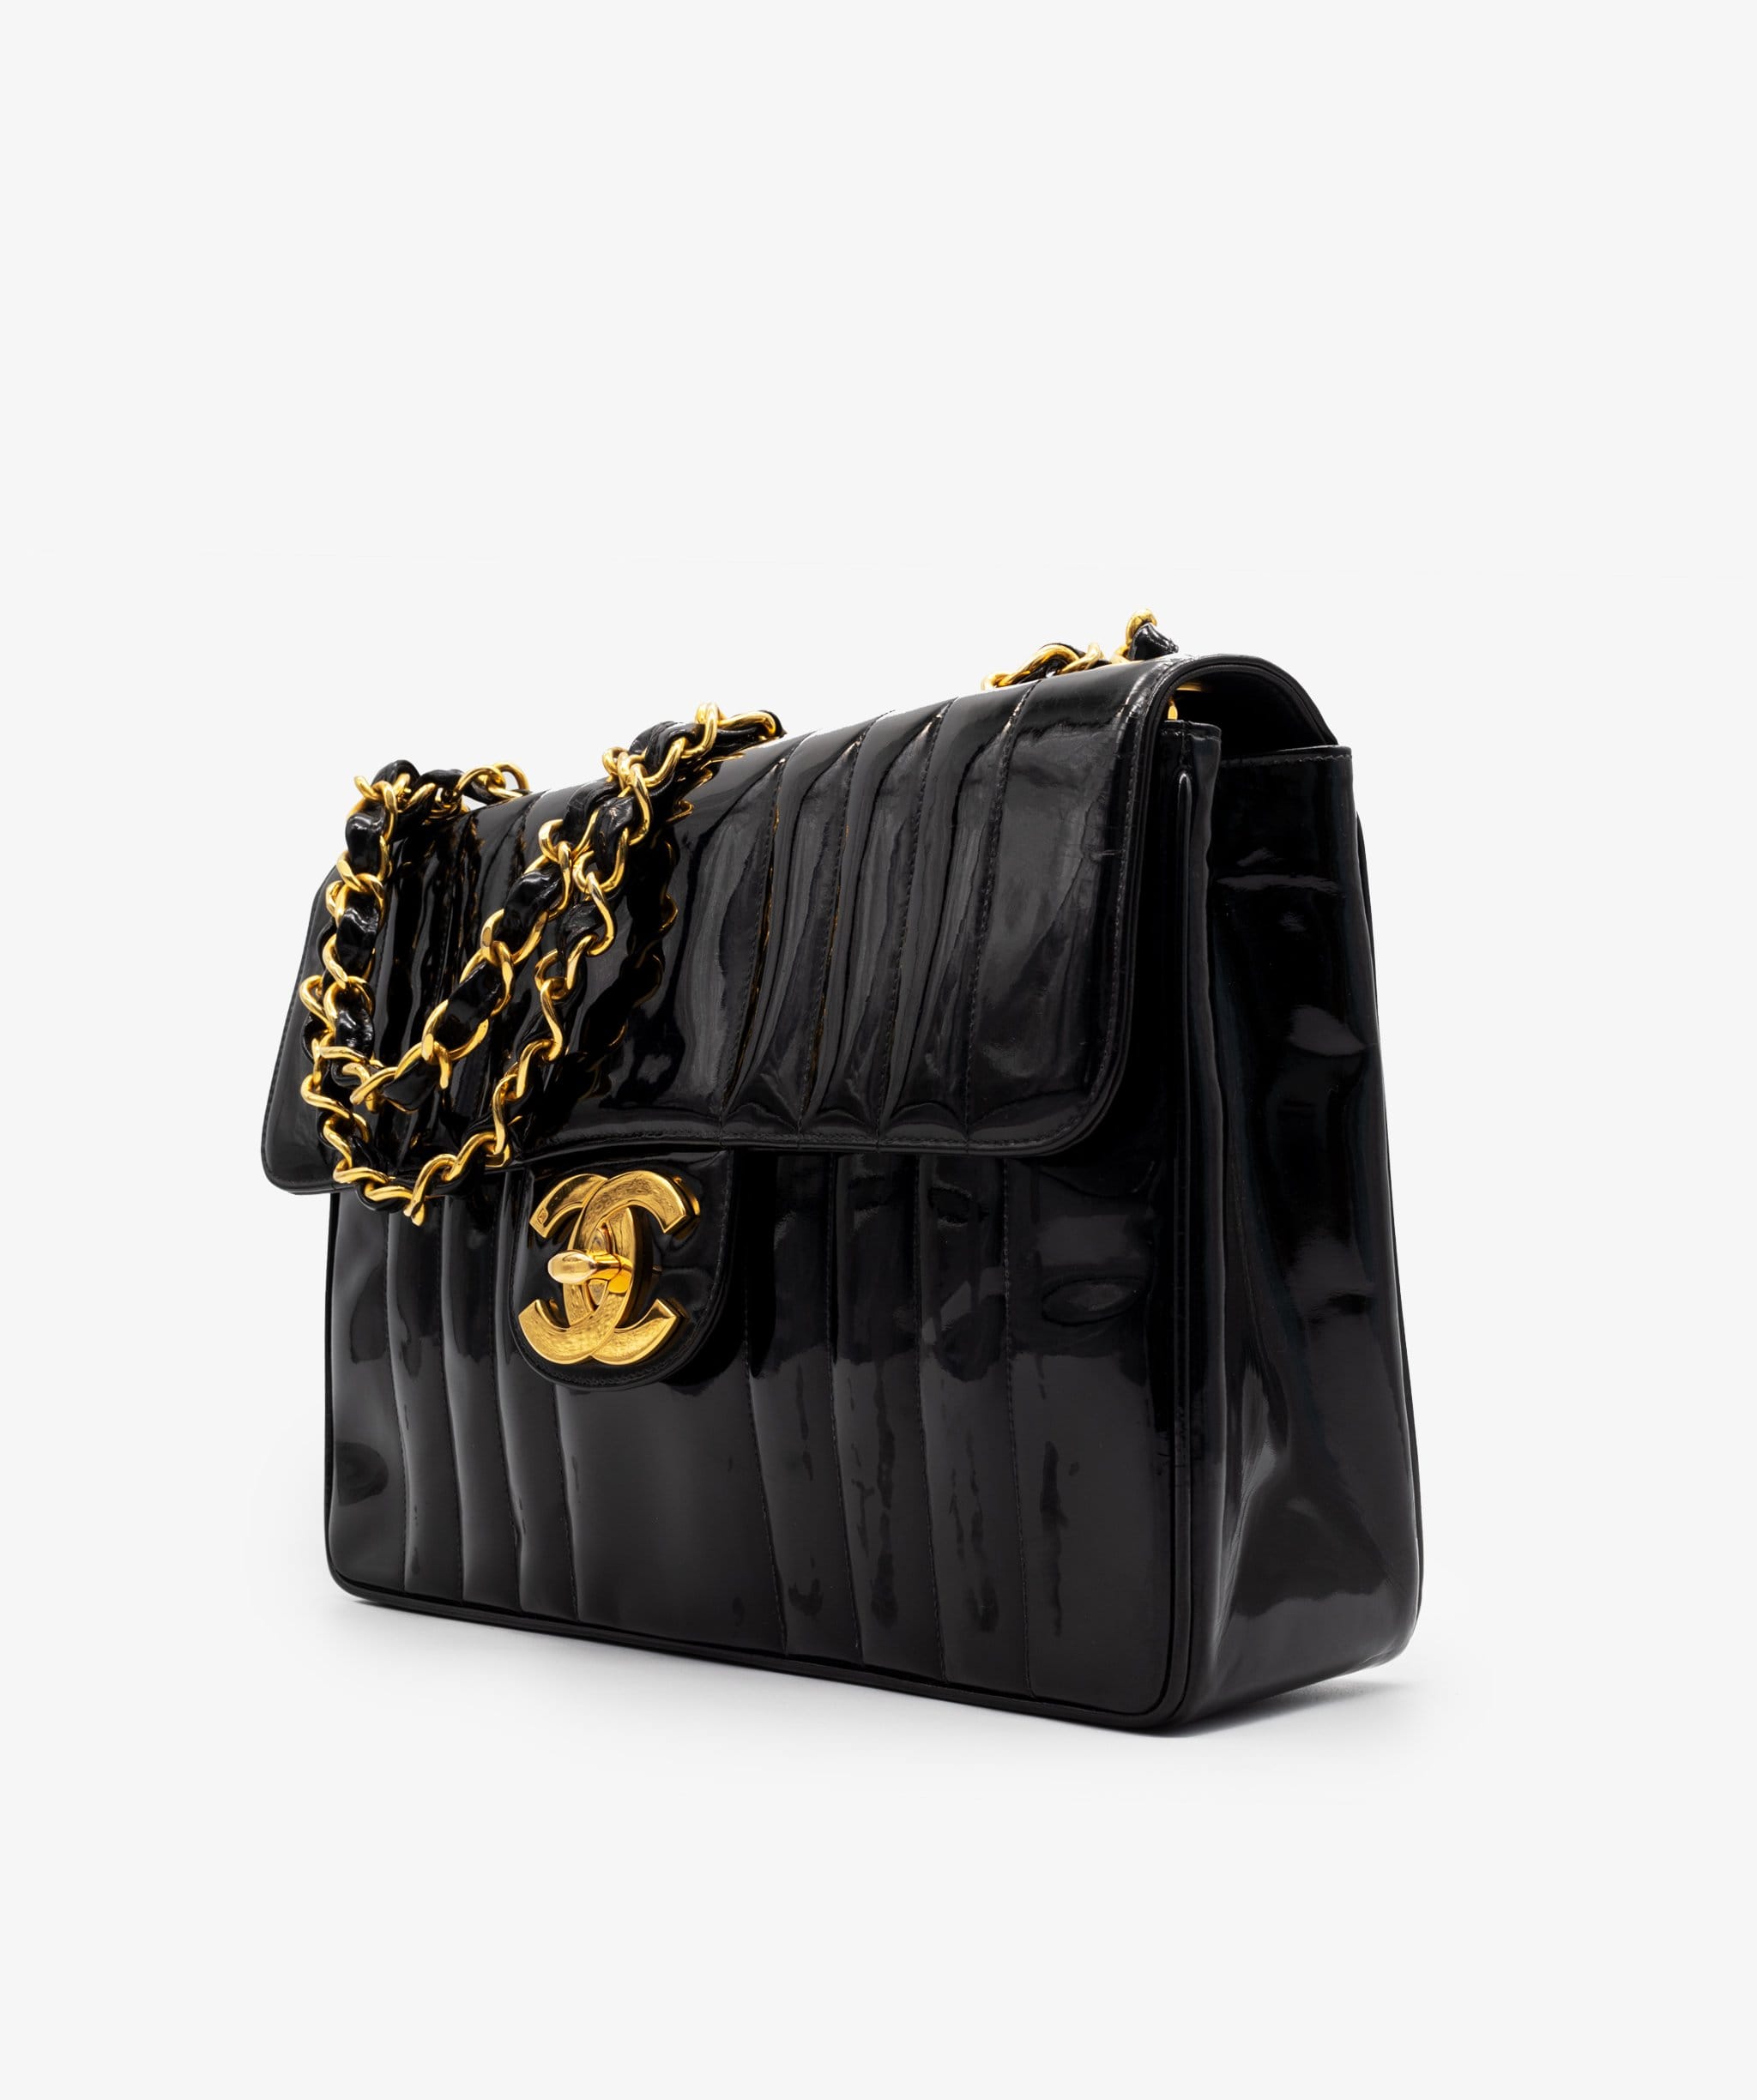 Chanel Chanel Vertical Stitch Patent Flap Bag - AWL1532